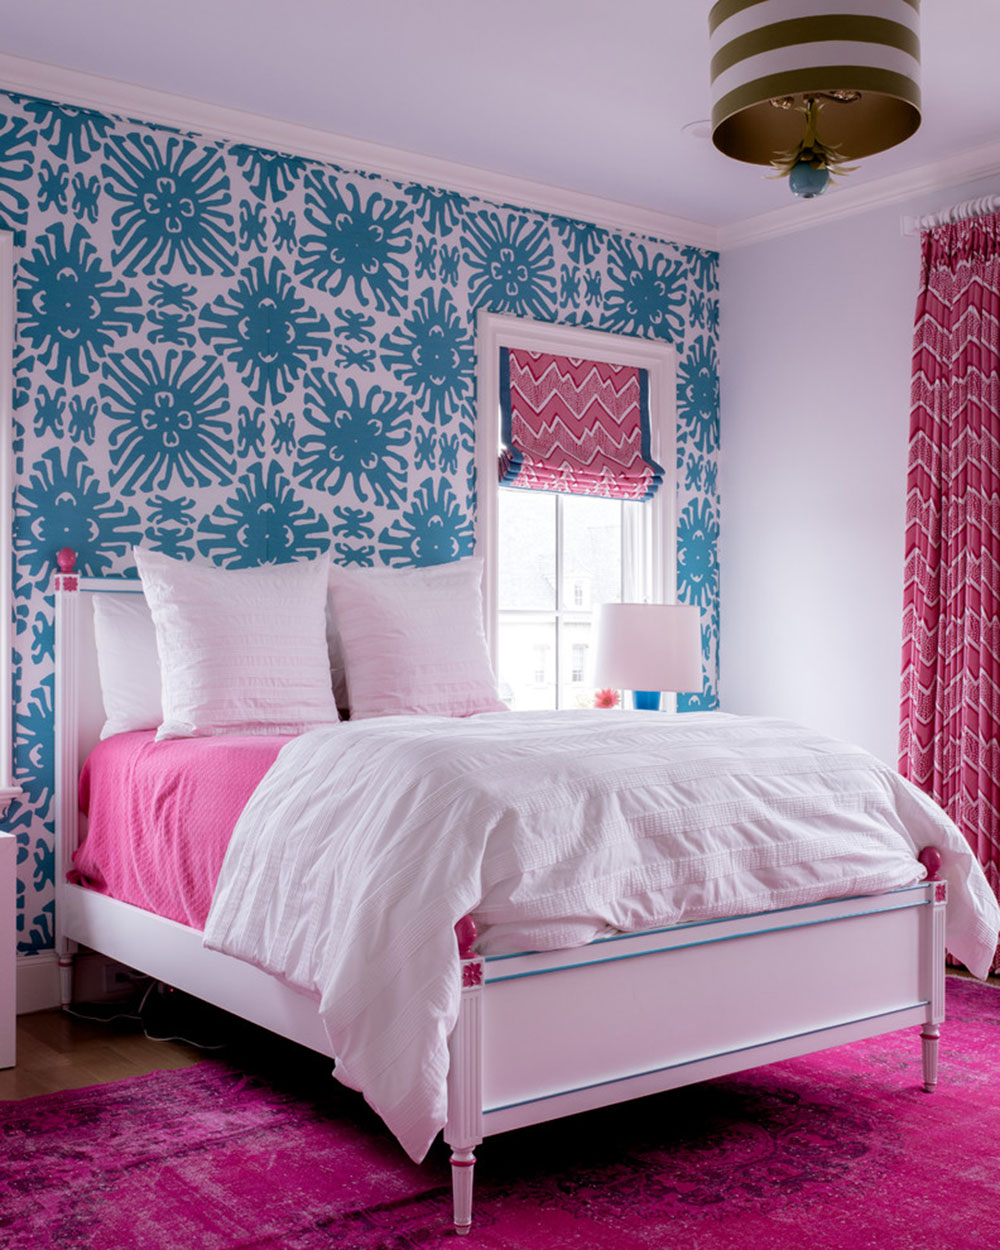 TRANSITIONAL-WARMTH-by-Erin-Sander-Design What colors go with blue? Blue paint ideas for your interiors